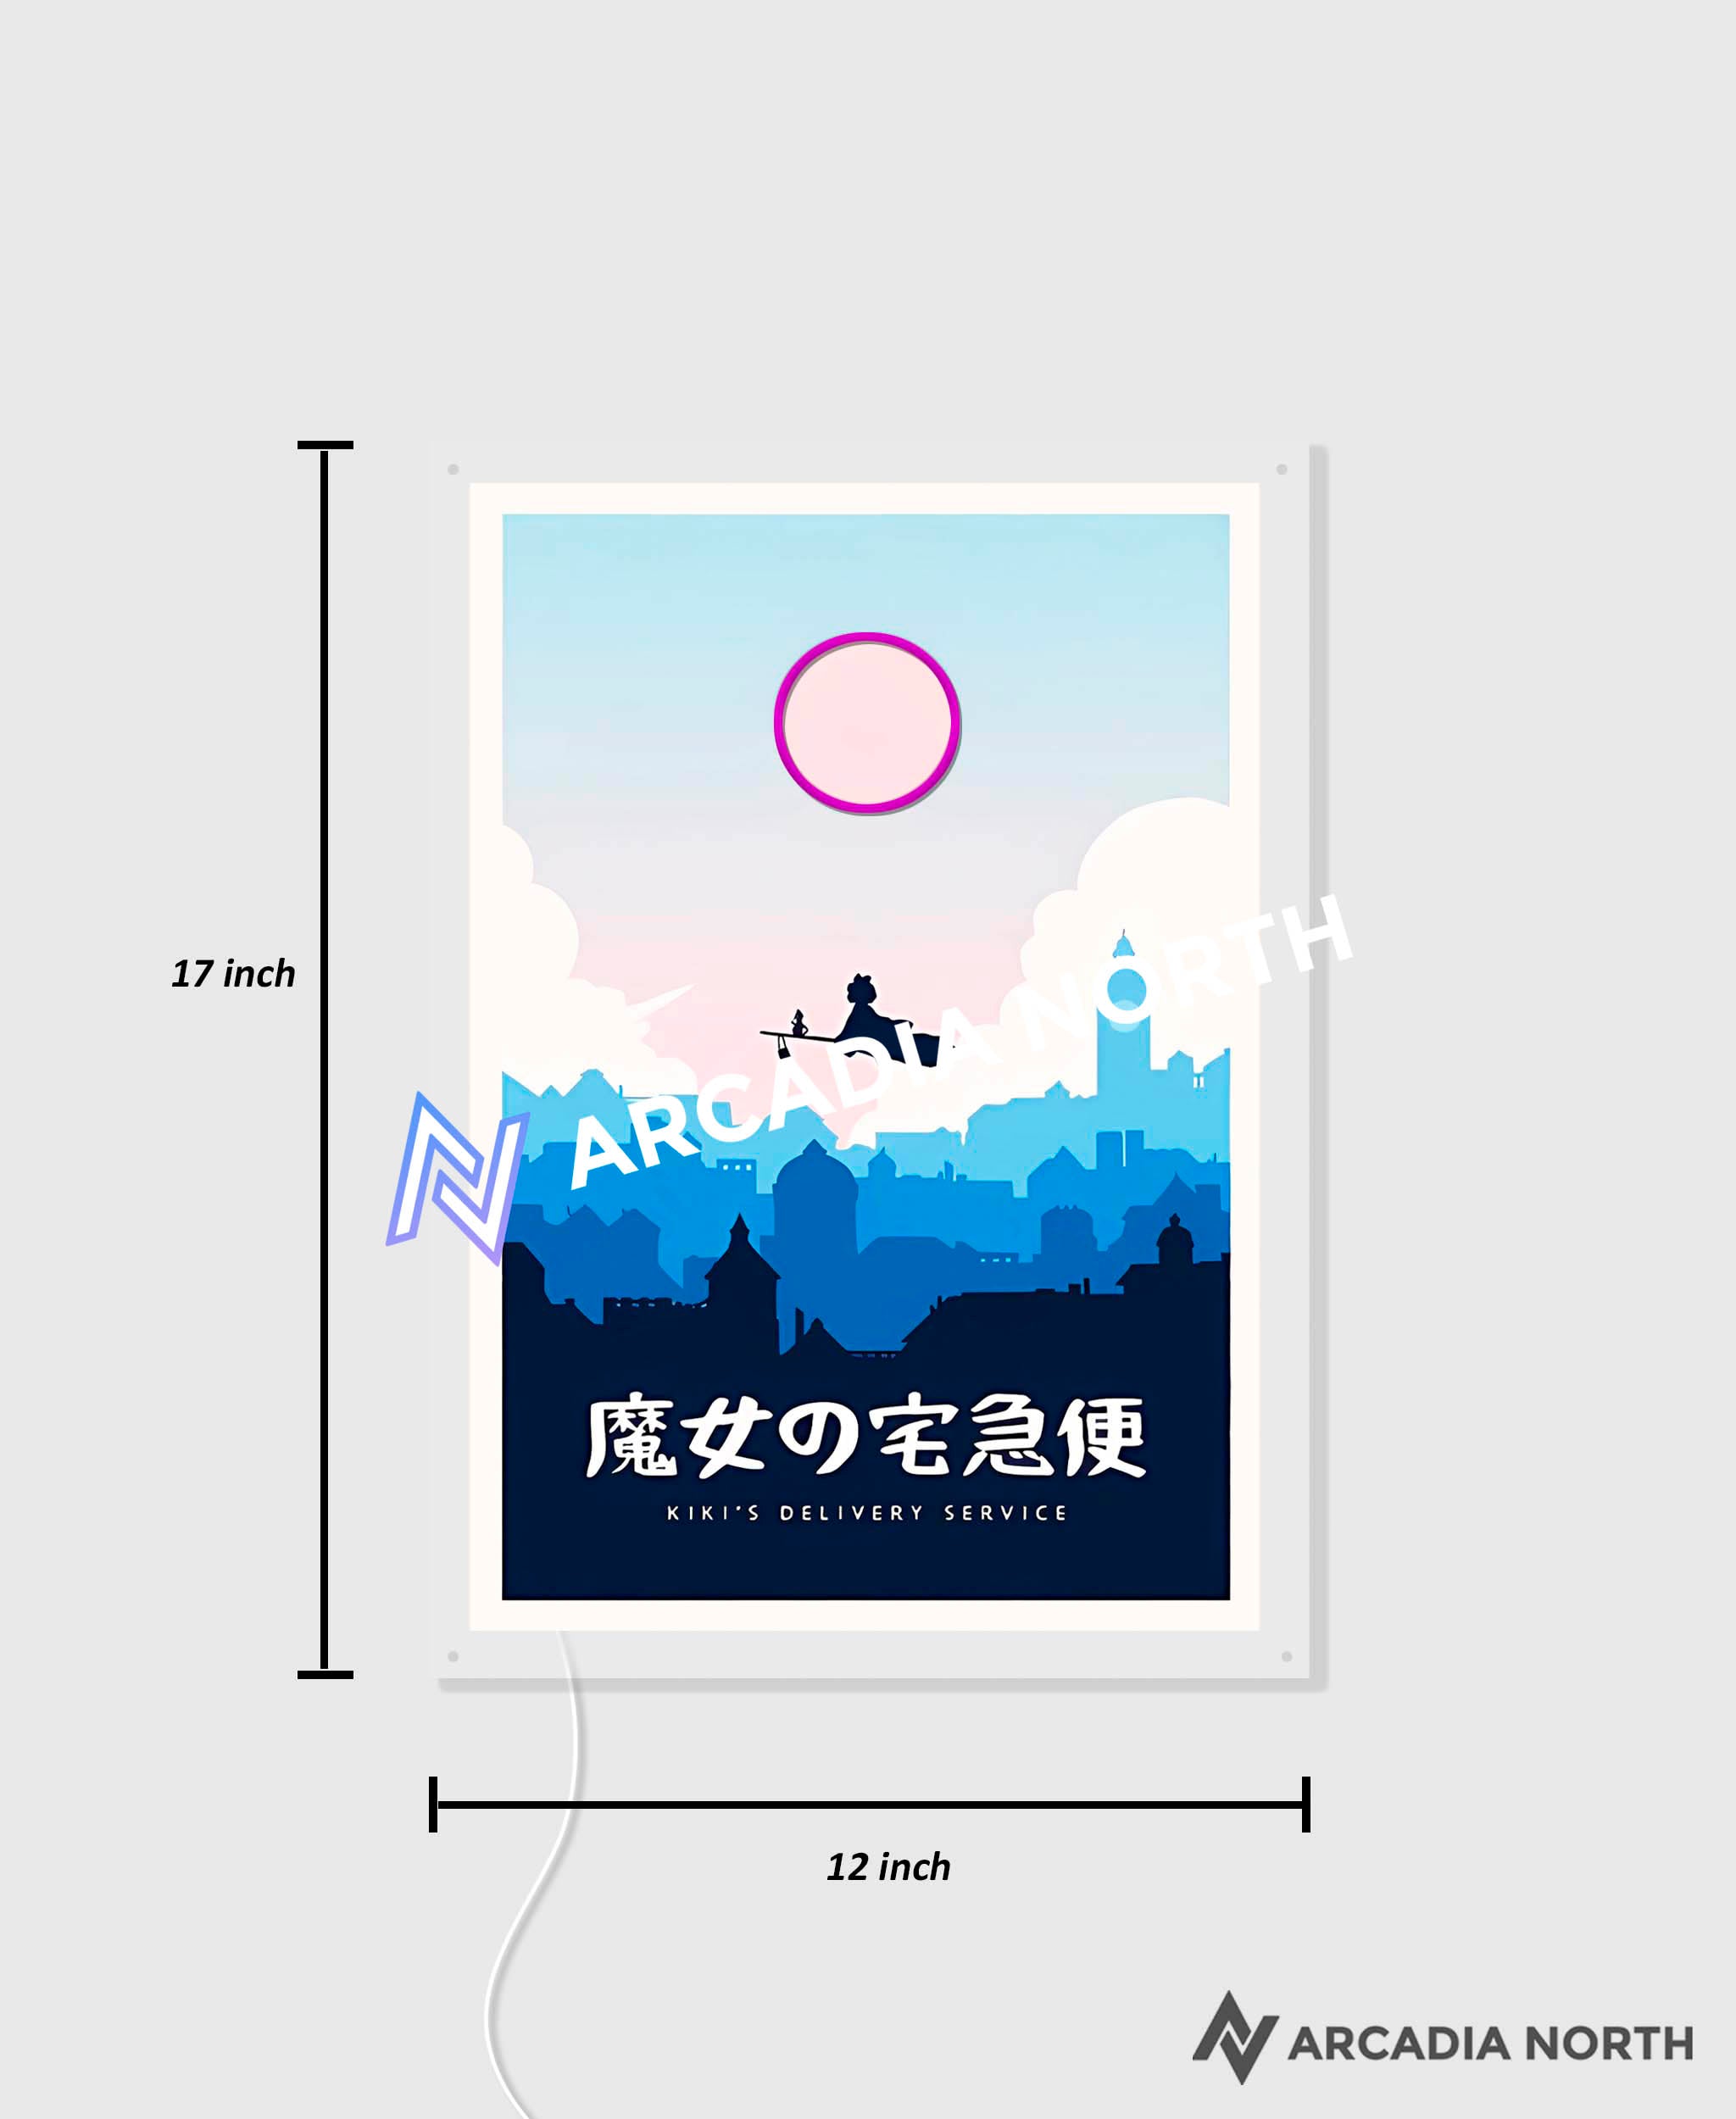 Arcadia North AURALIGHT Original LED Poster featuring the Studio Ghibli anime Kiki's Delivery Service in minimalistic style. Illuminated by glowing neon LED lights. UV-printed on acrylic.